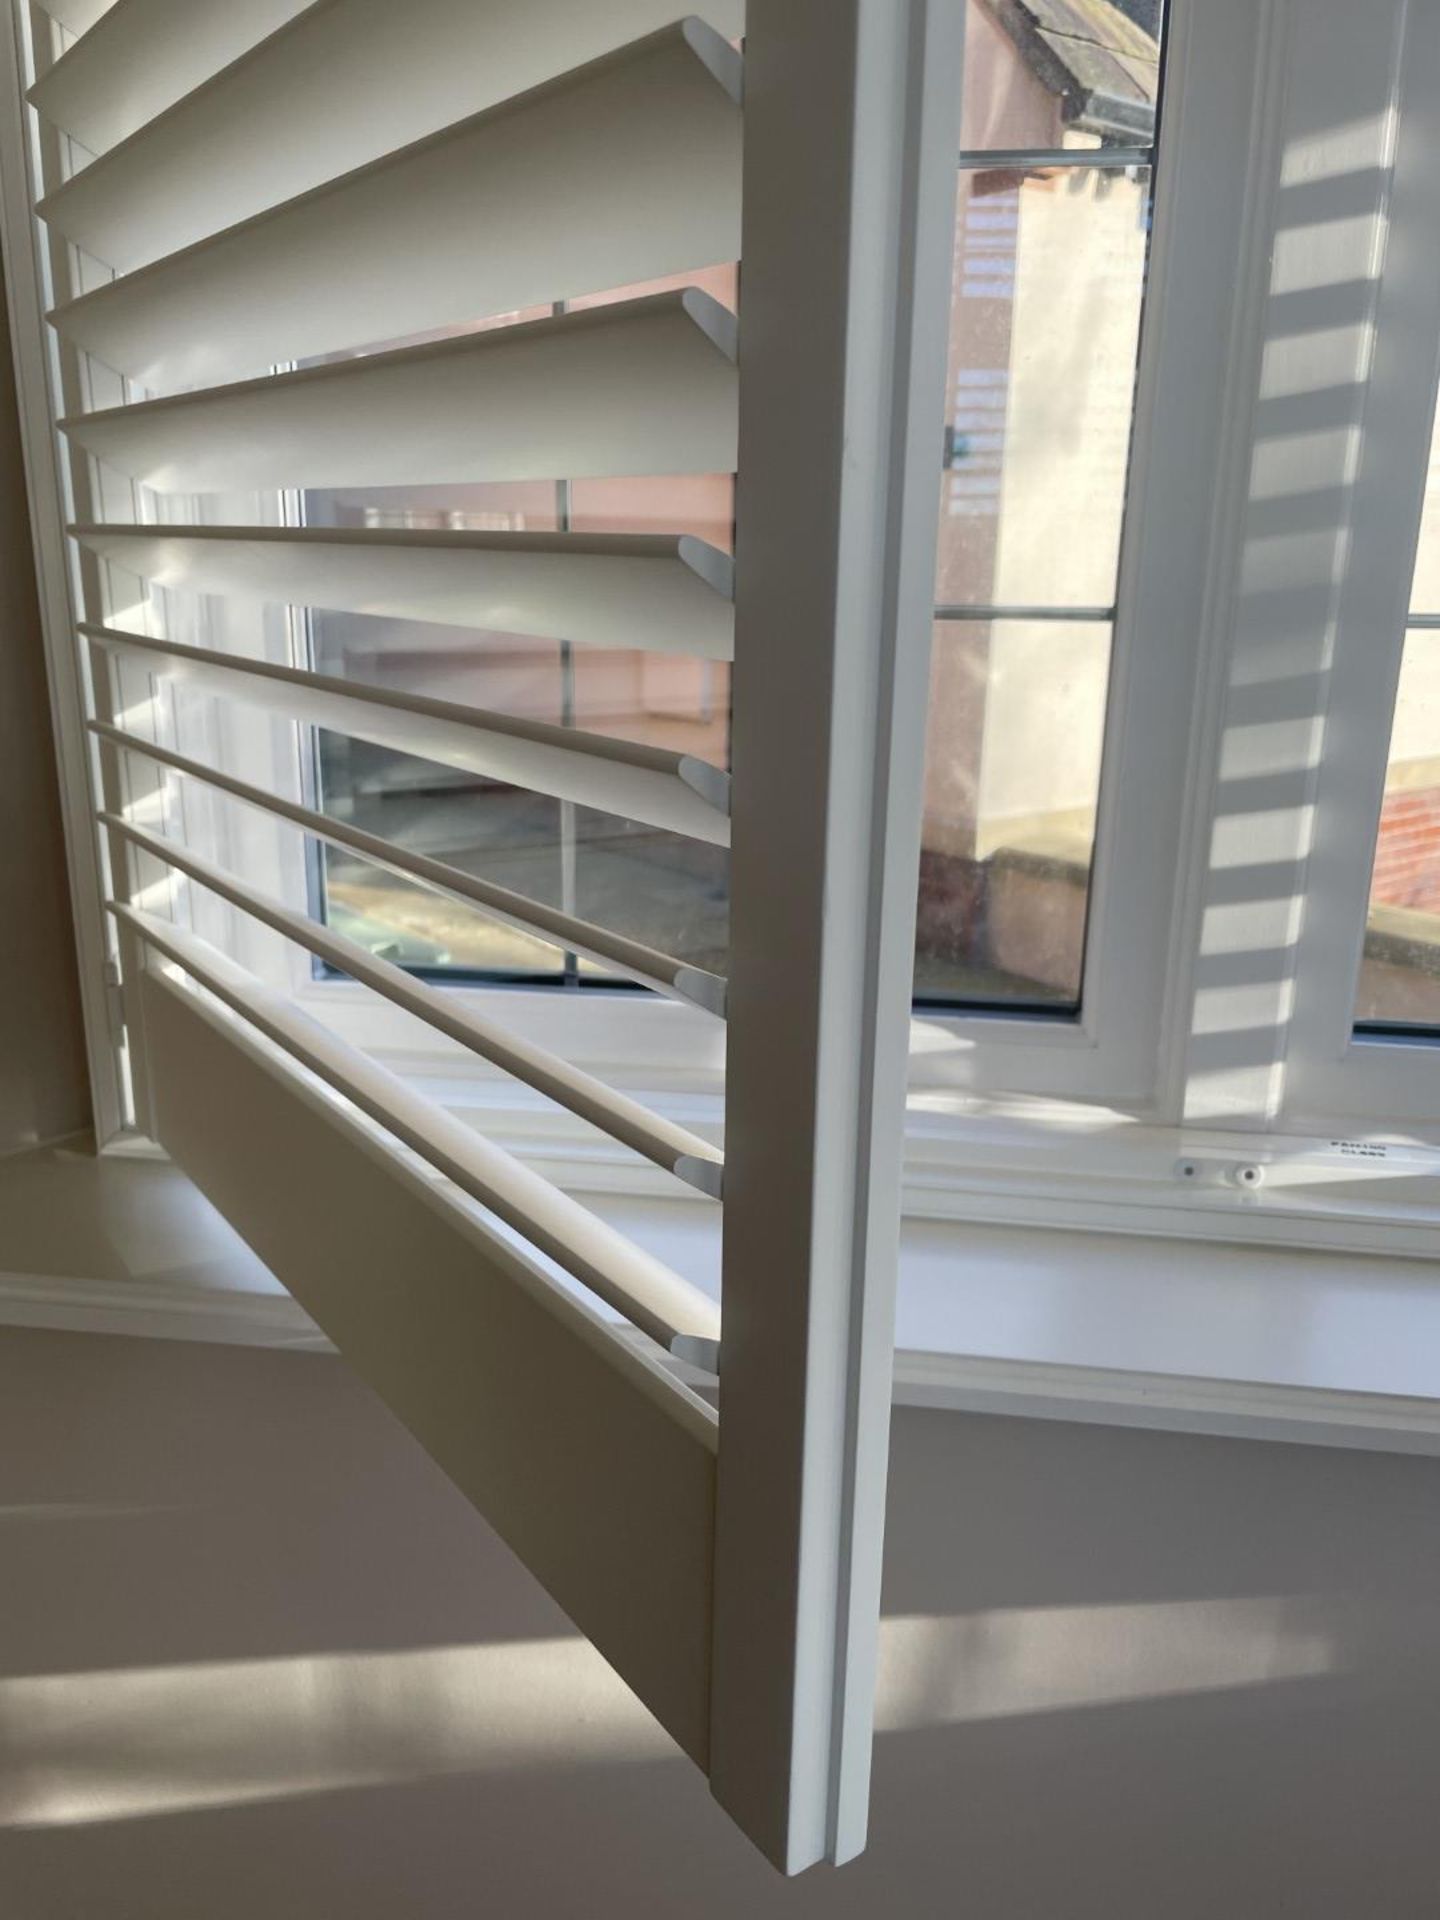 1 x Hardwood Timber Double Glazed Window Frames fitted with Shutter Blinds, In White - Image 5 of 24